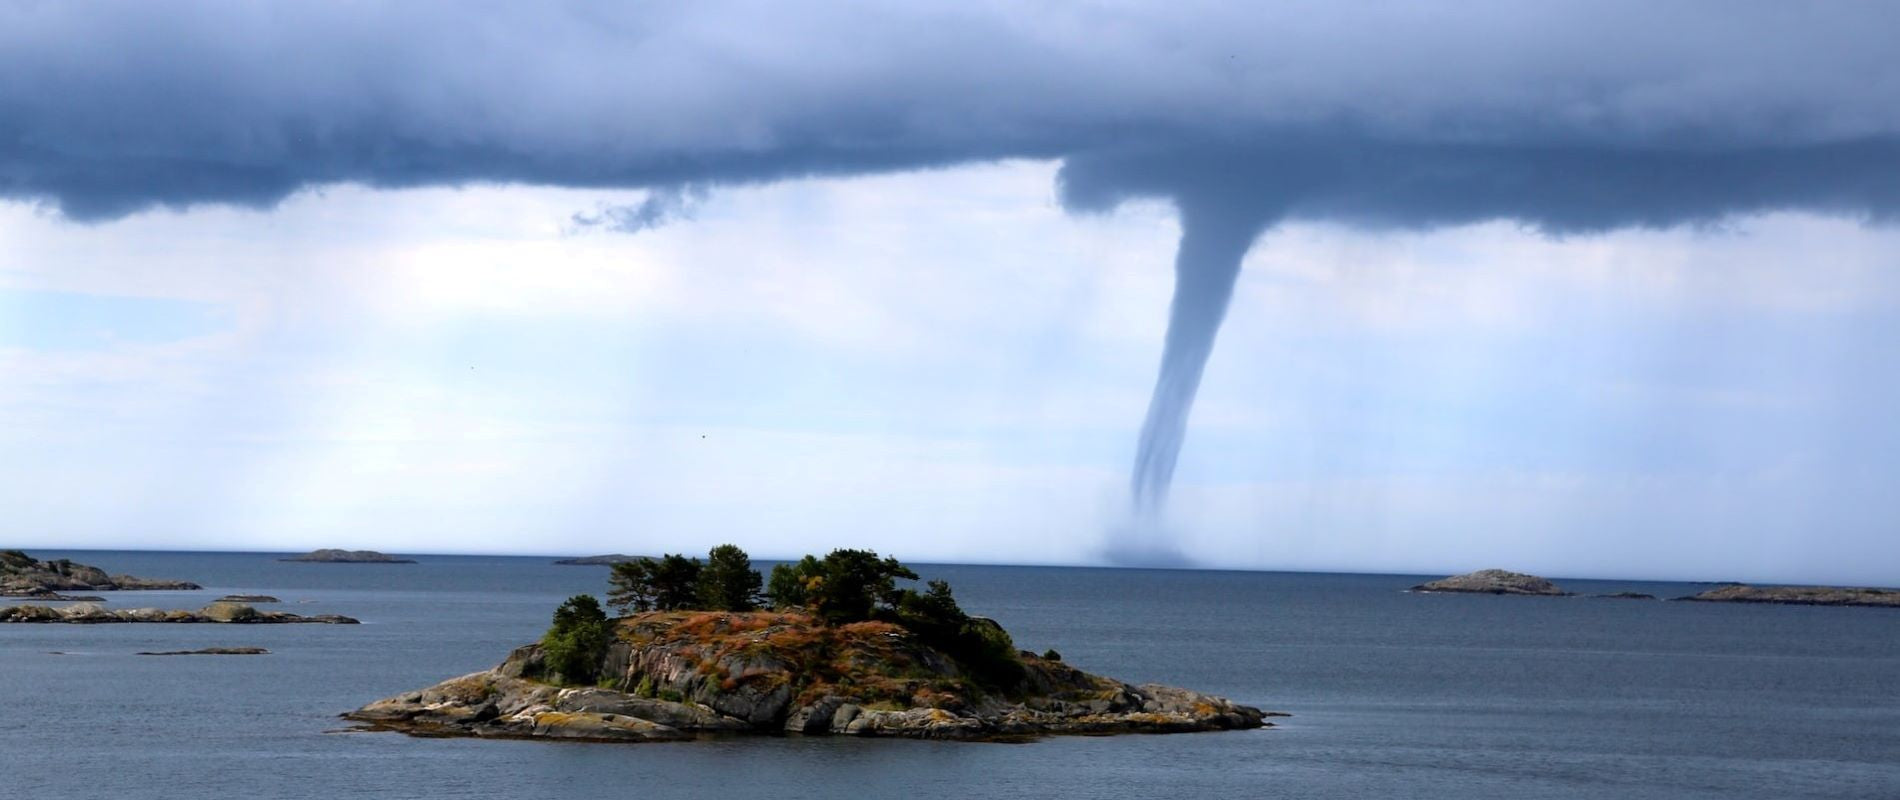 Natural Disaster Waterspout Tornado approaching Island and mainland in daytime..